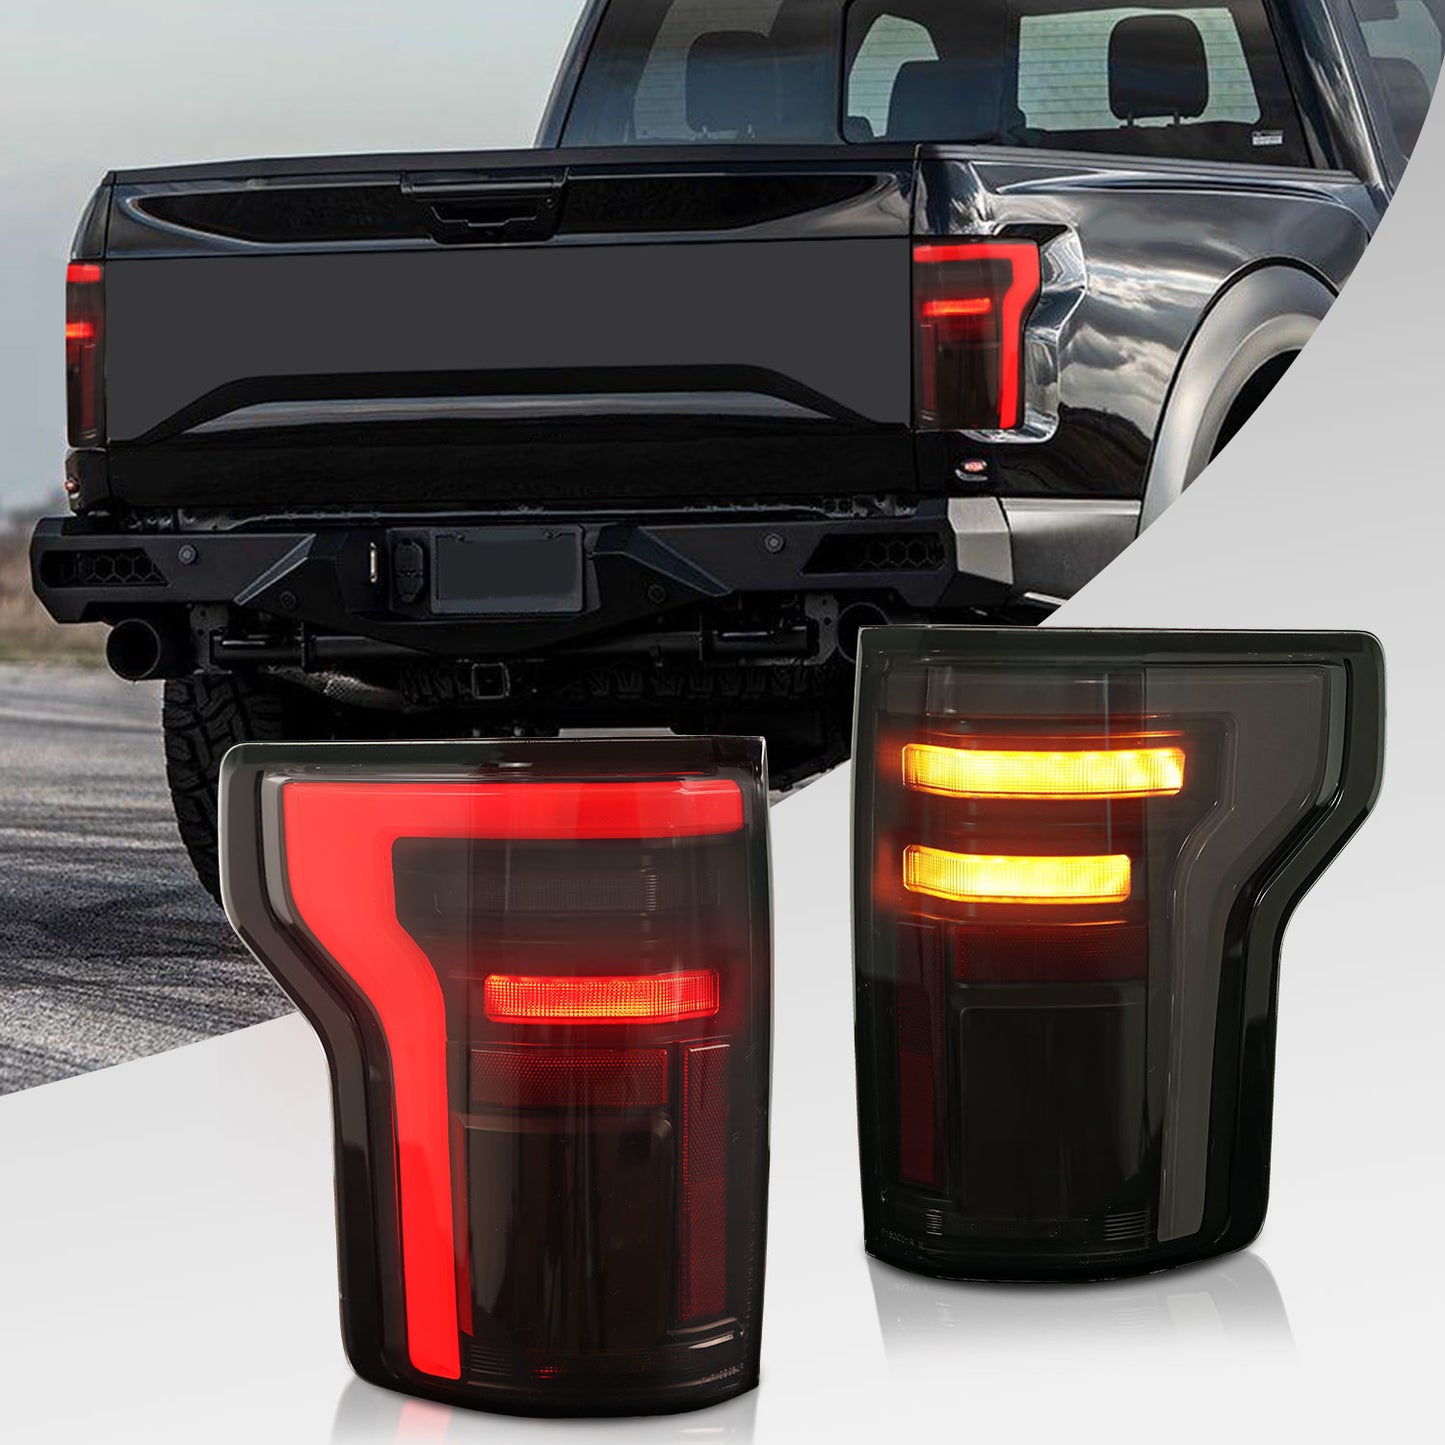 Full LED Tail lights Assembly For Ford F-150 2015-2020